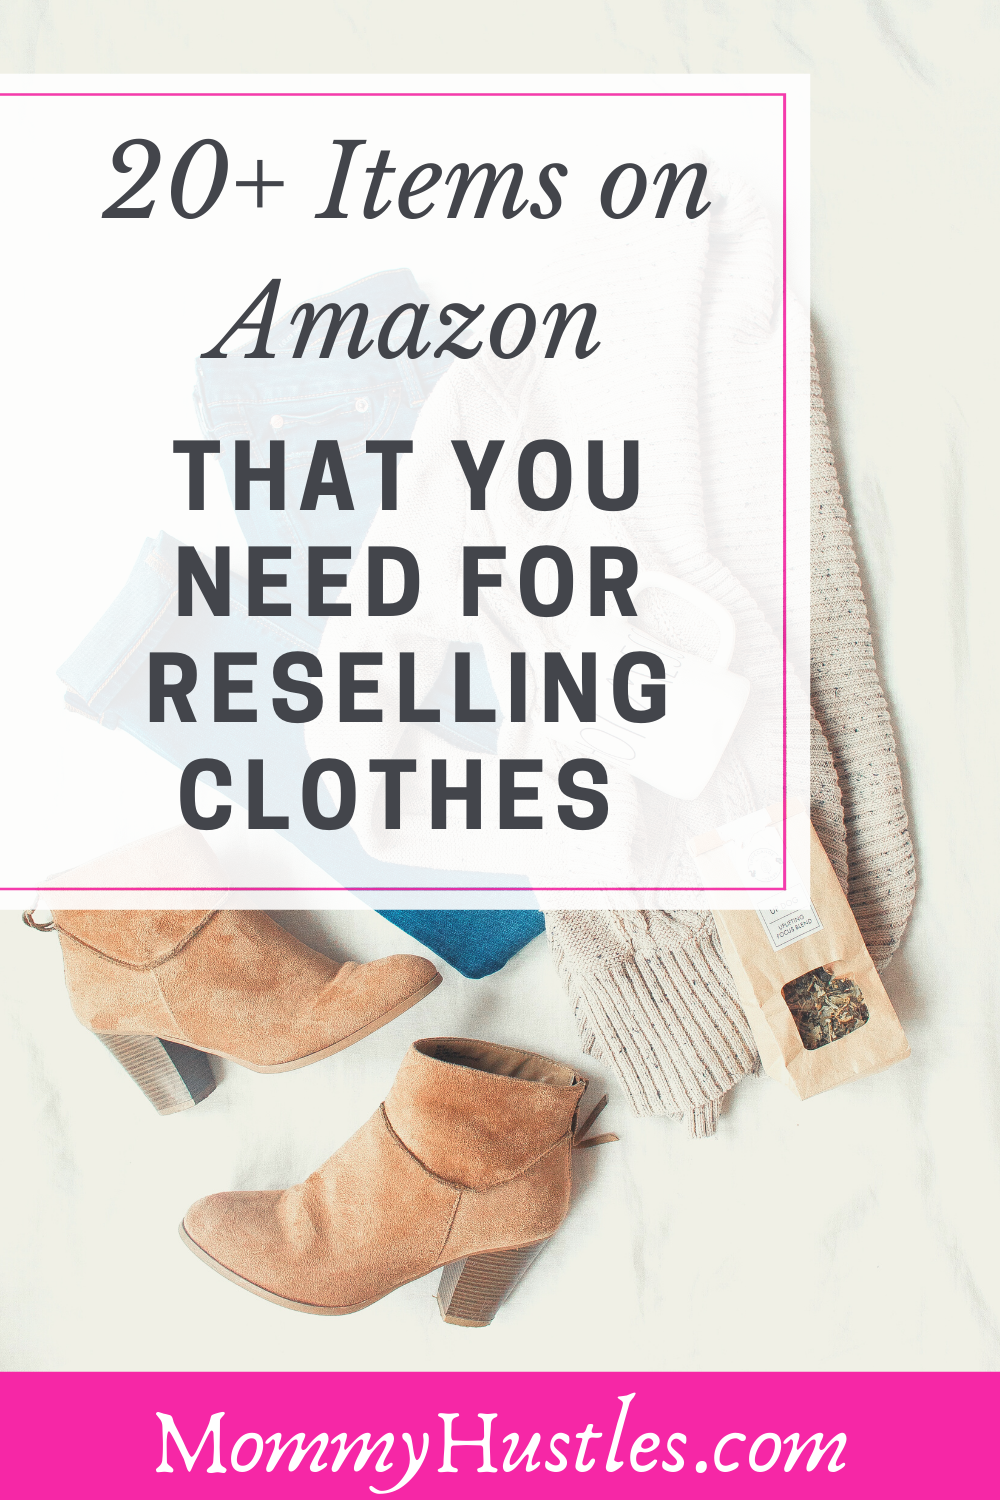 20+ Items on Amazon That You Need For Reselling Clothes